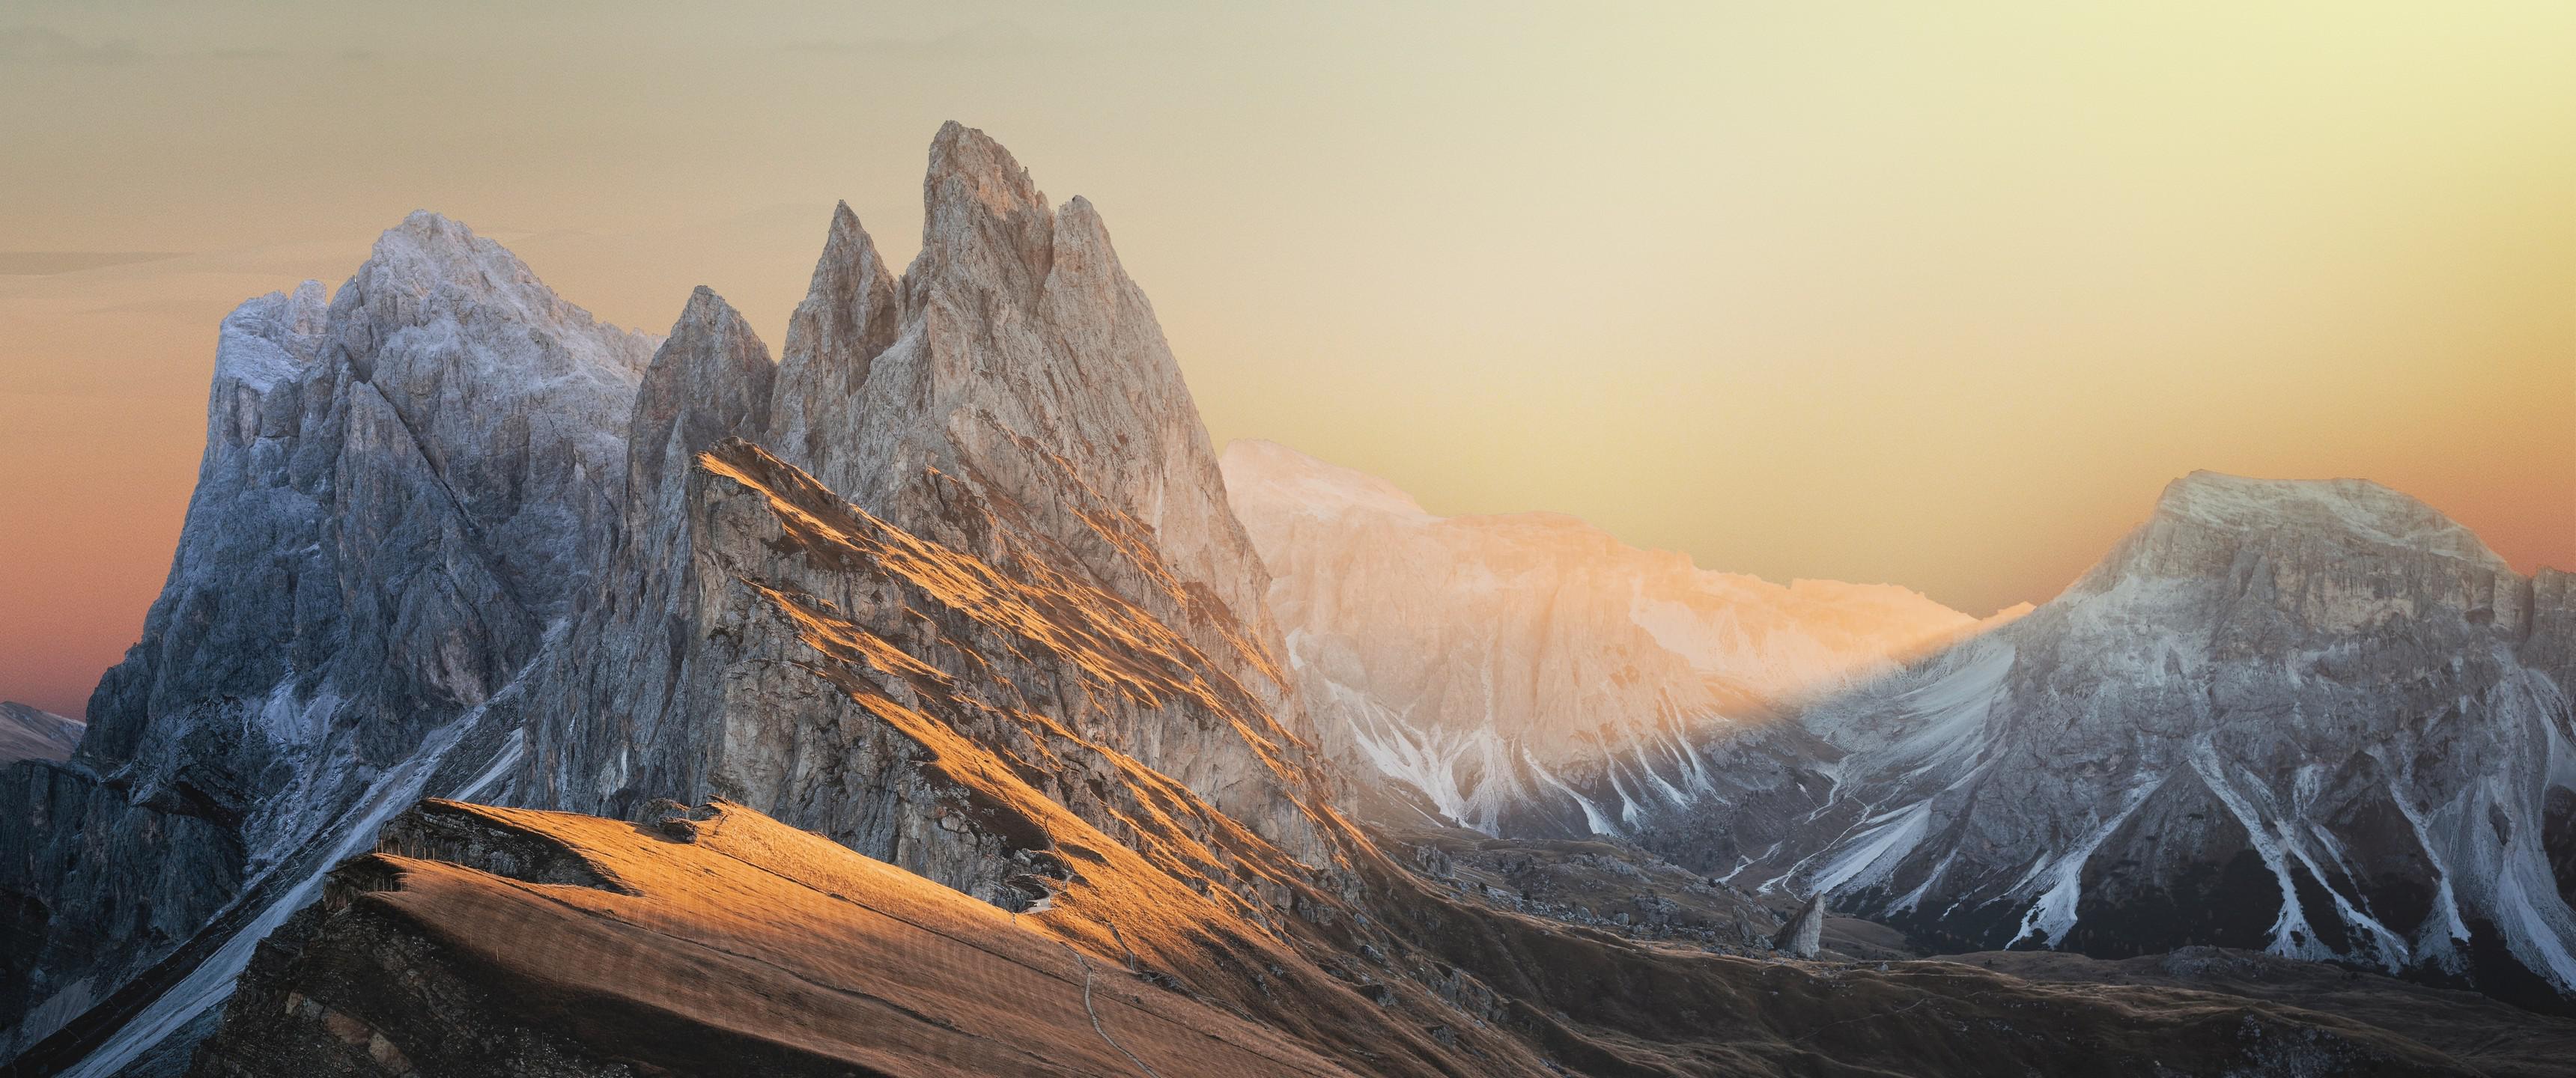 General 3440x1440 South Tyrol Italy mountains sunrise sunset sunset glow Seceda